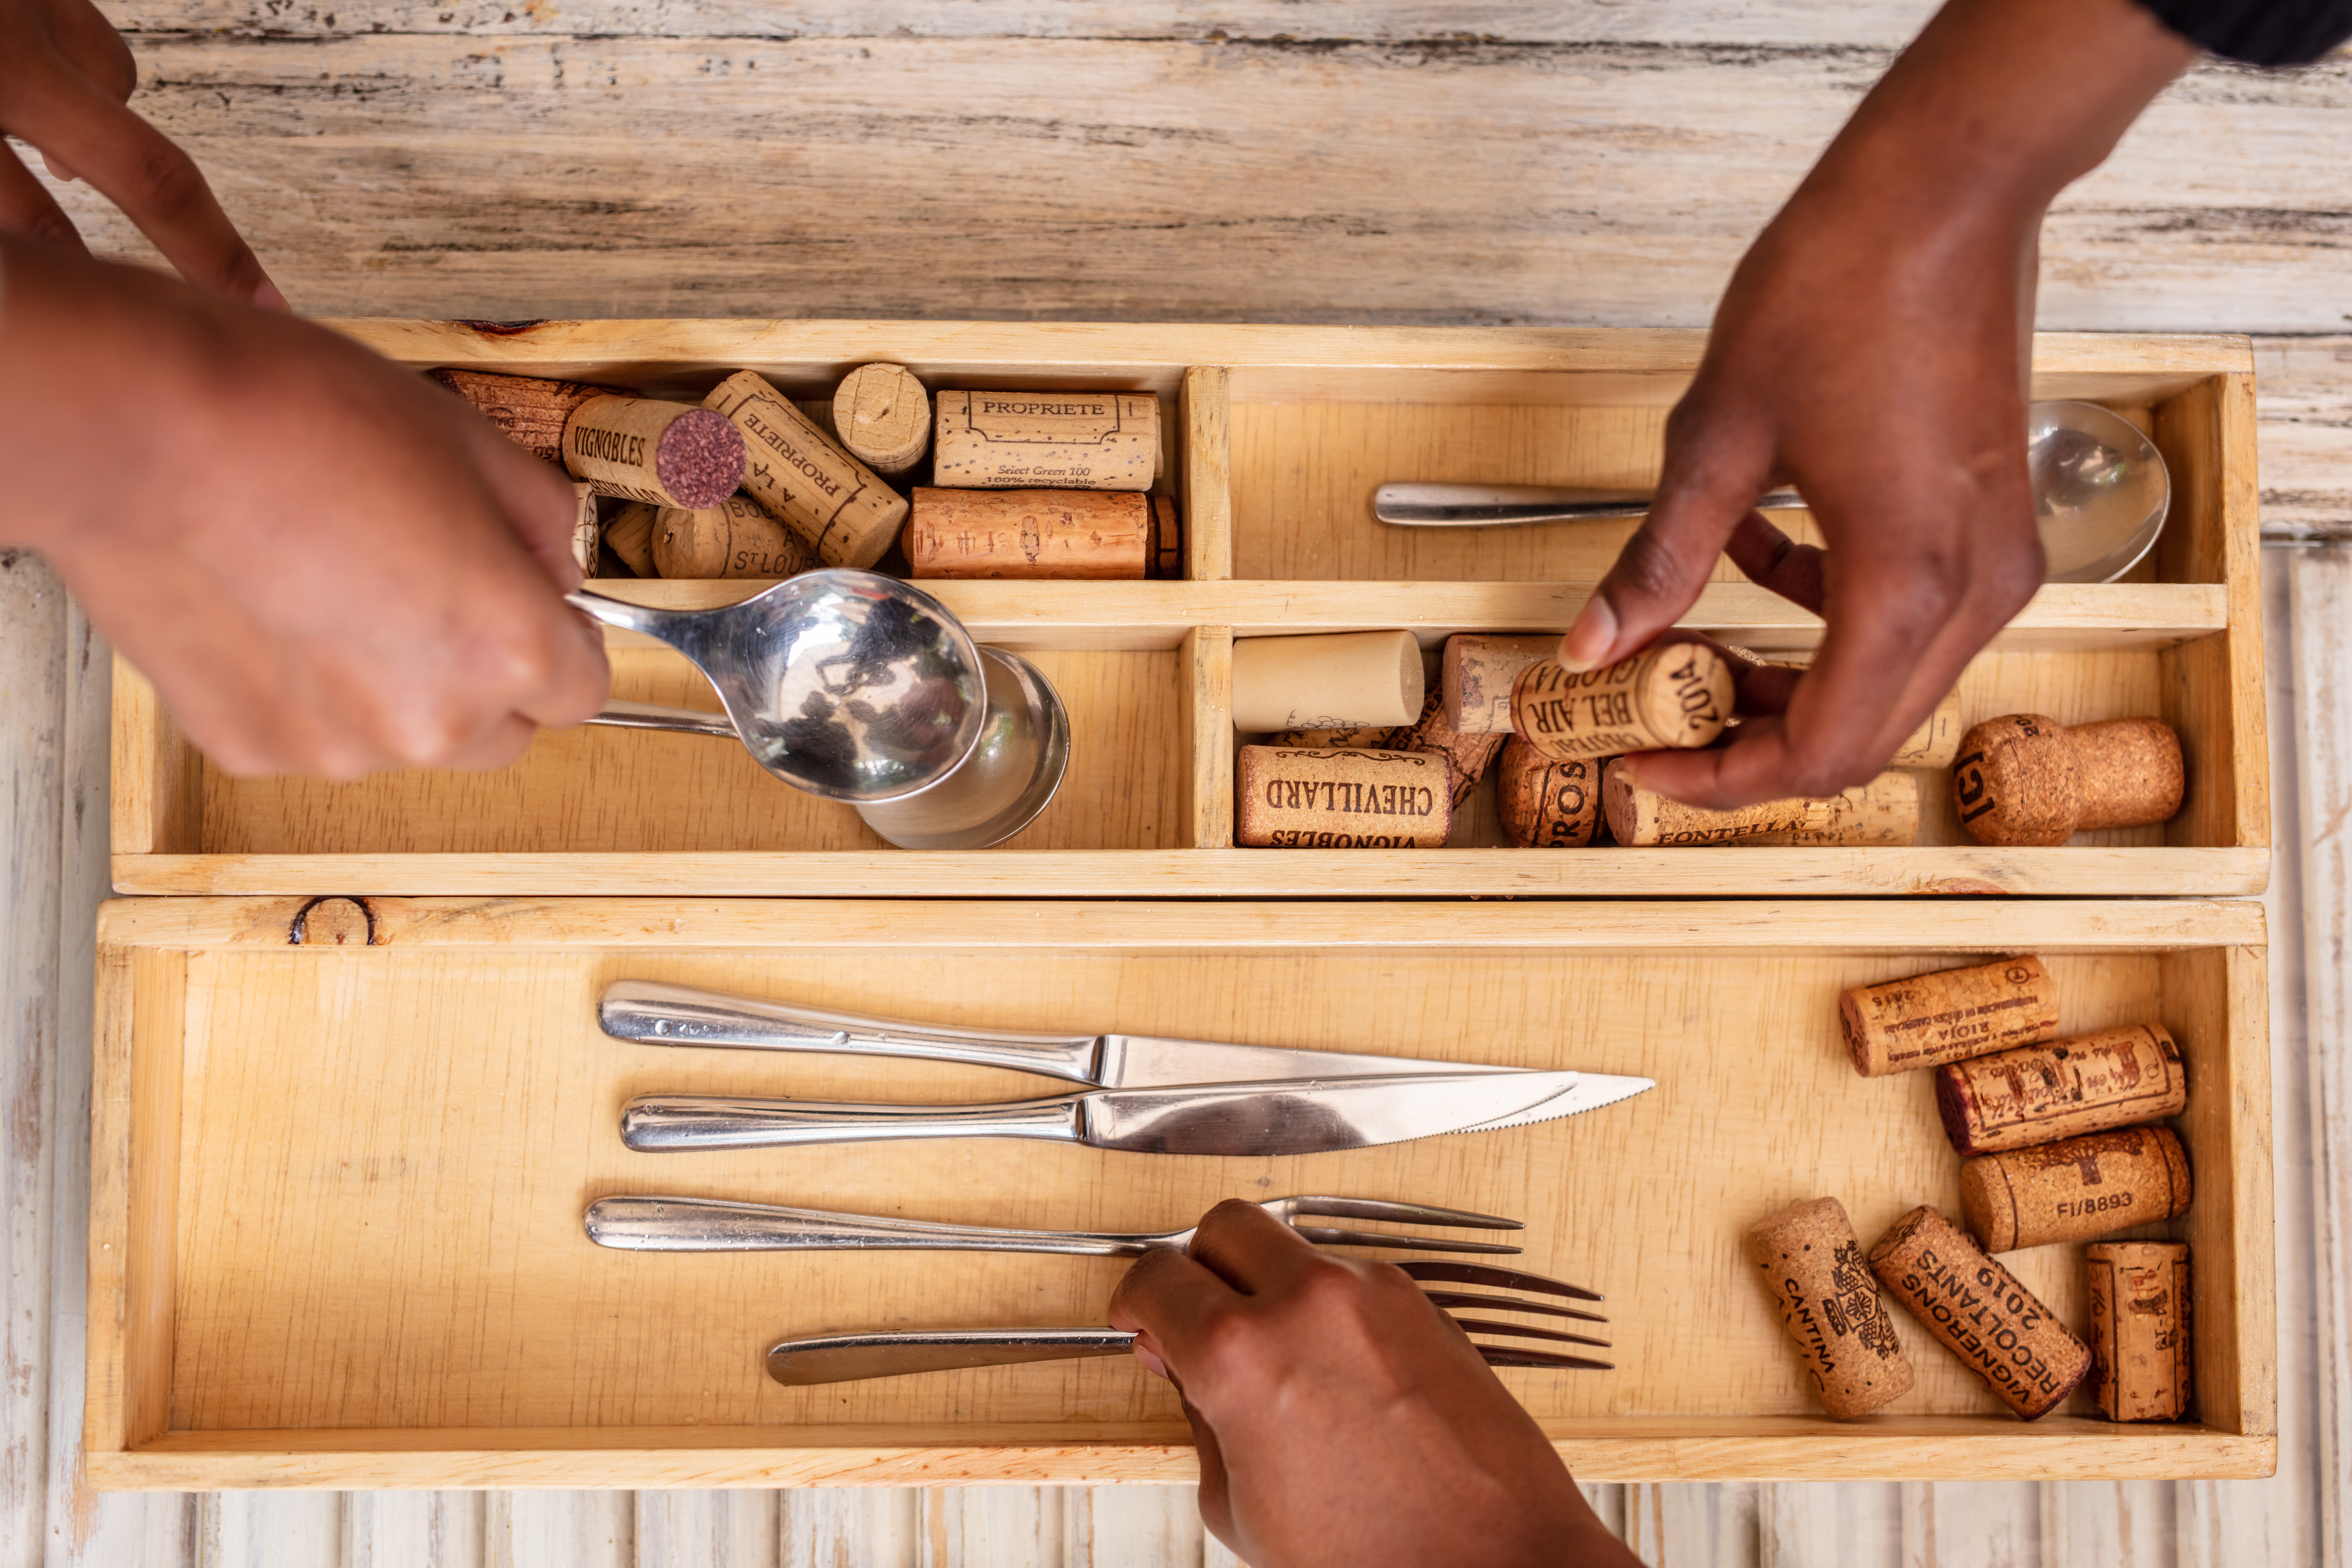 An image of a wooden cutlery tray made by an Urban Change Lab artisan. The image is demonstrating the use of the custom-made tray.